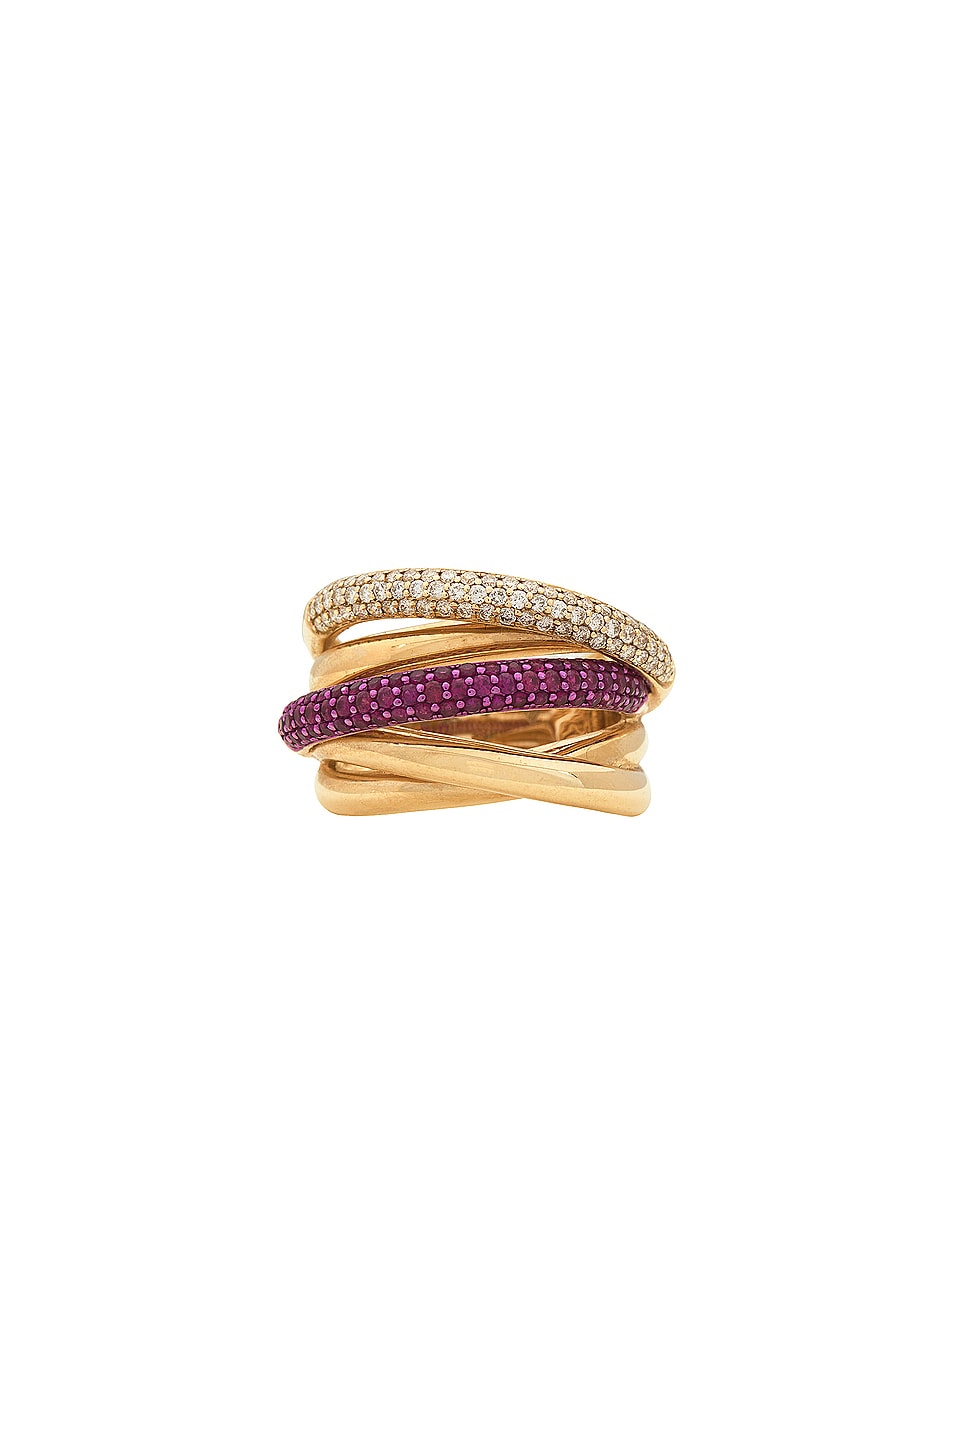 Image 1 of Siena Jewelry Crisscross Ring in 14k Yellow Gold & Ruby